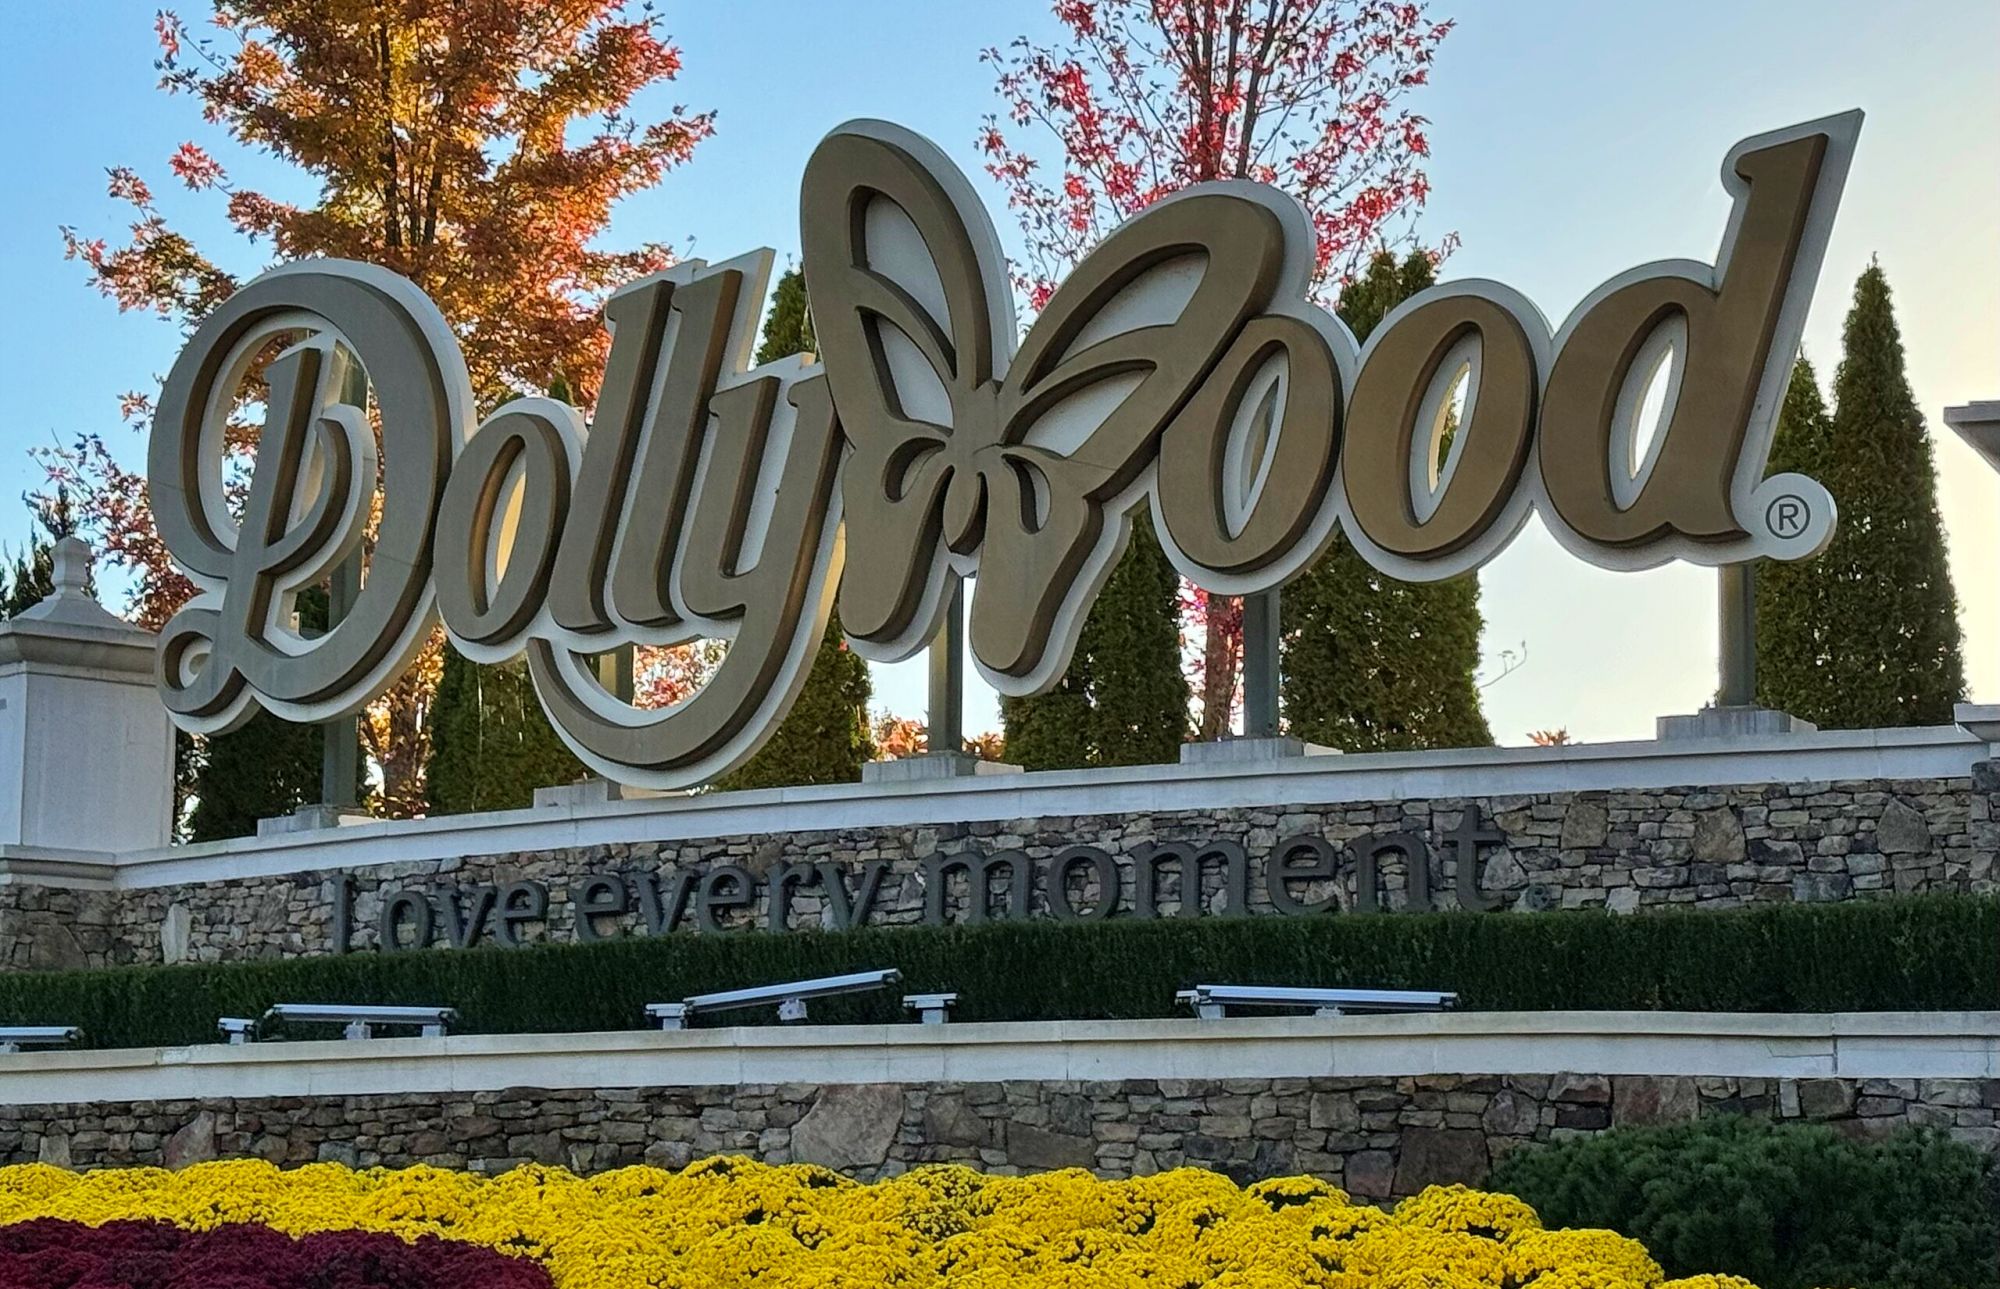 Dollywood came tops in a NAPHA survey